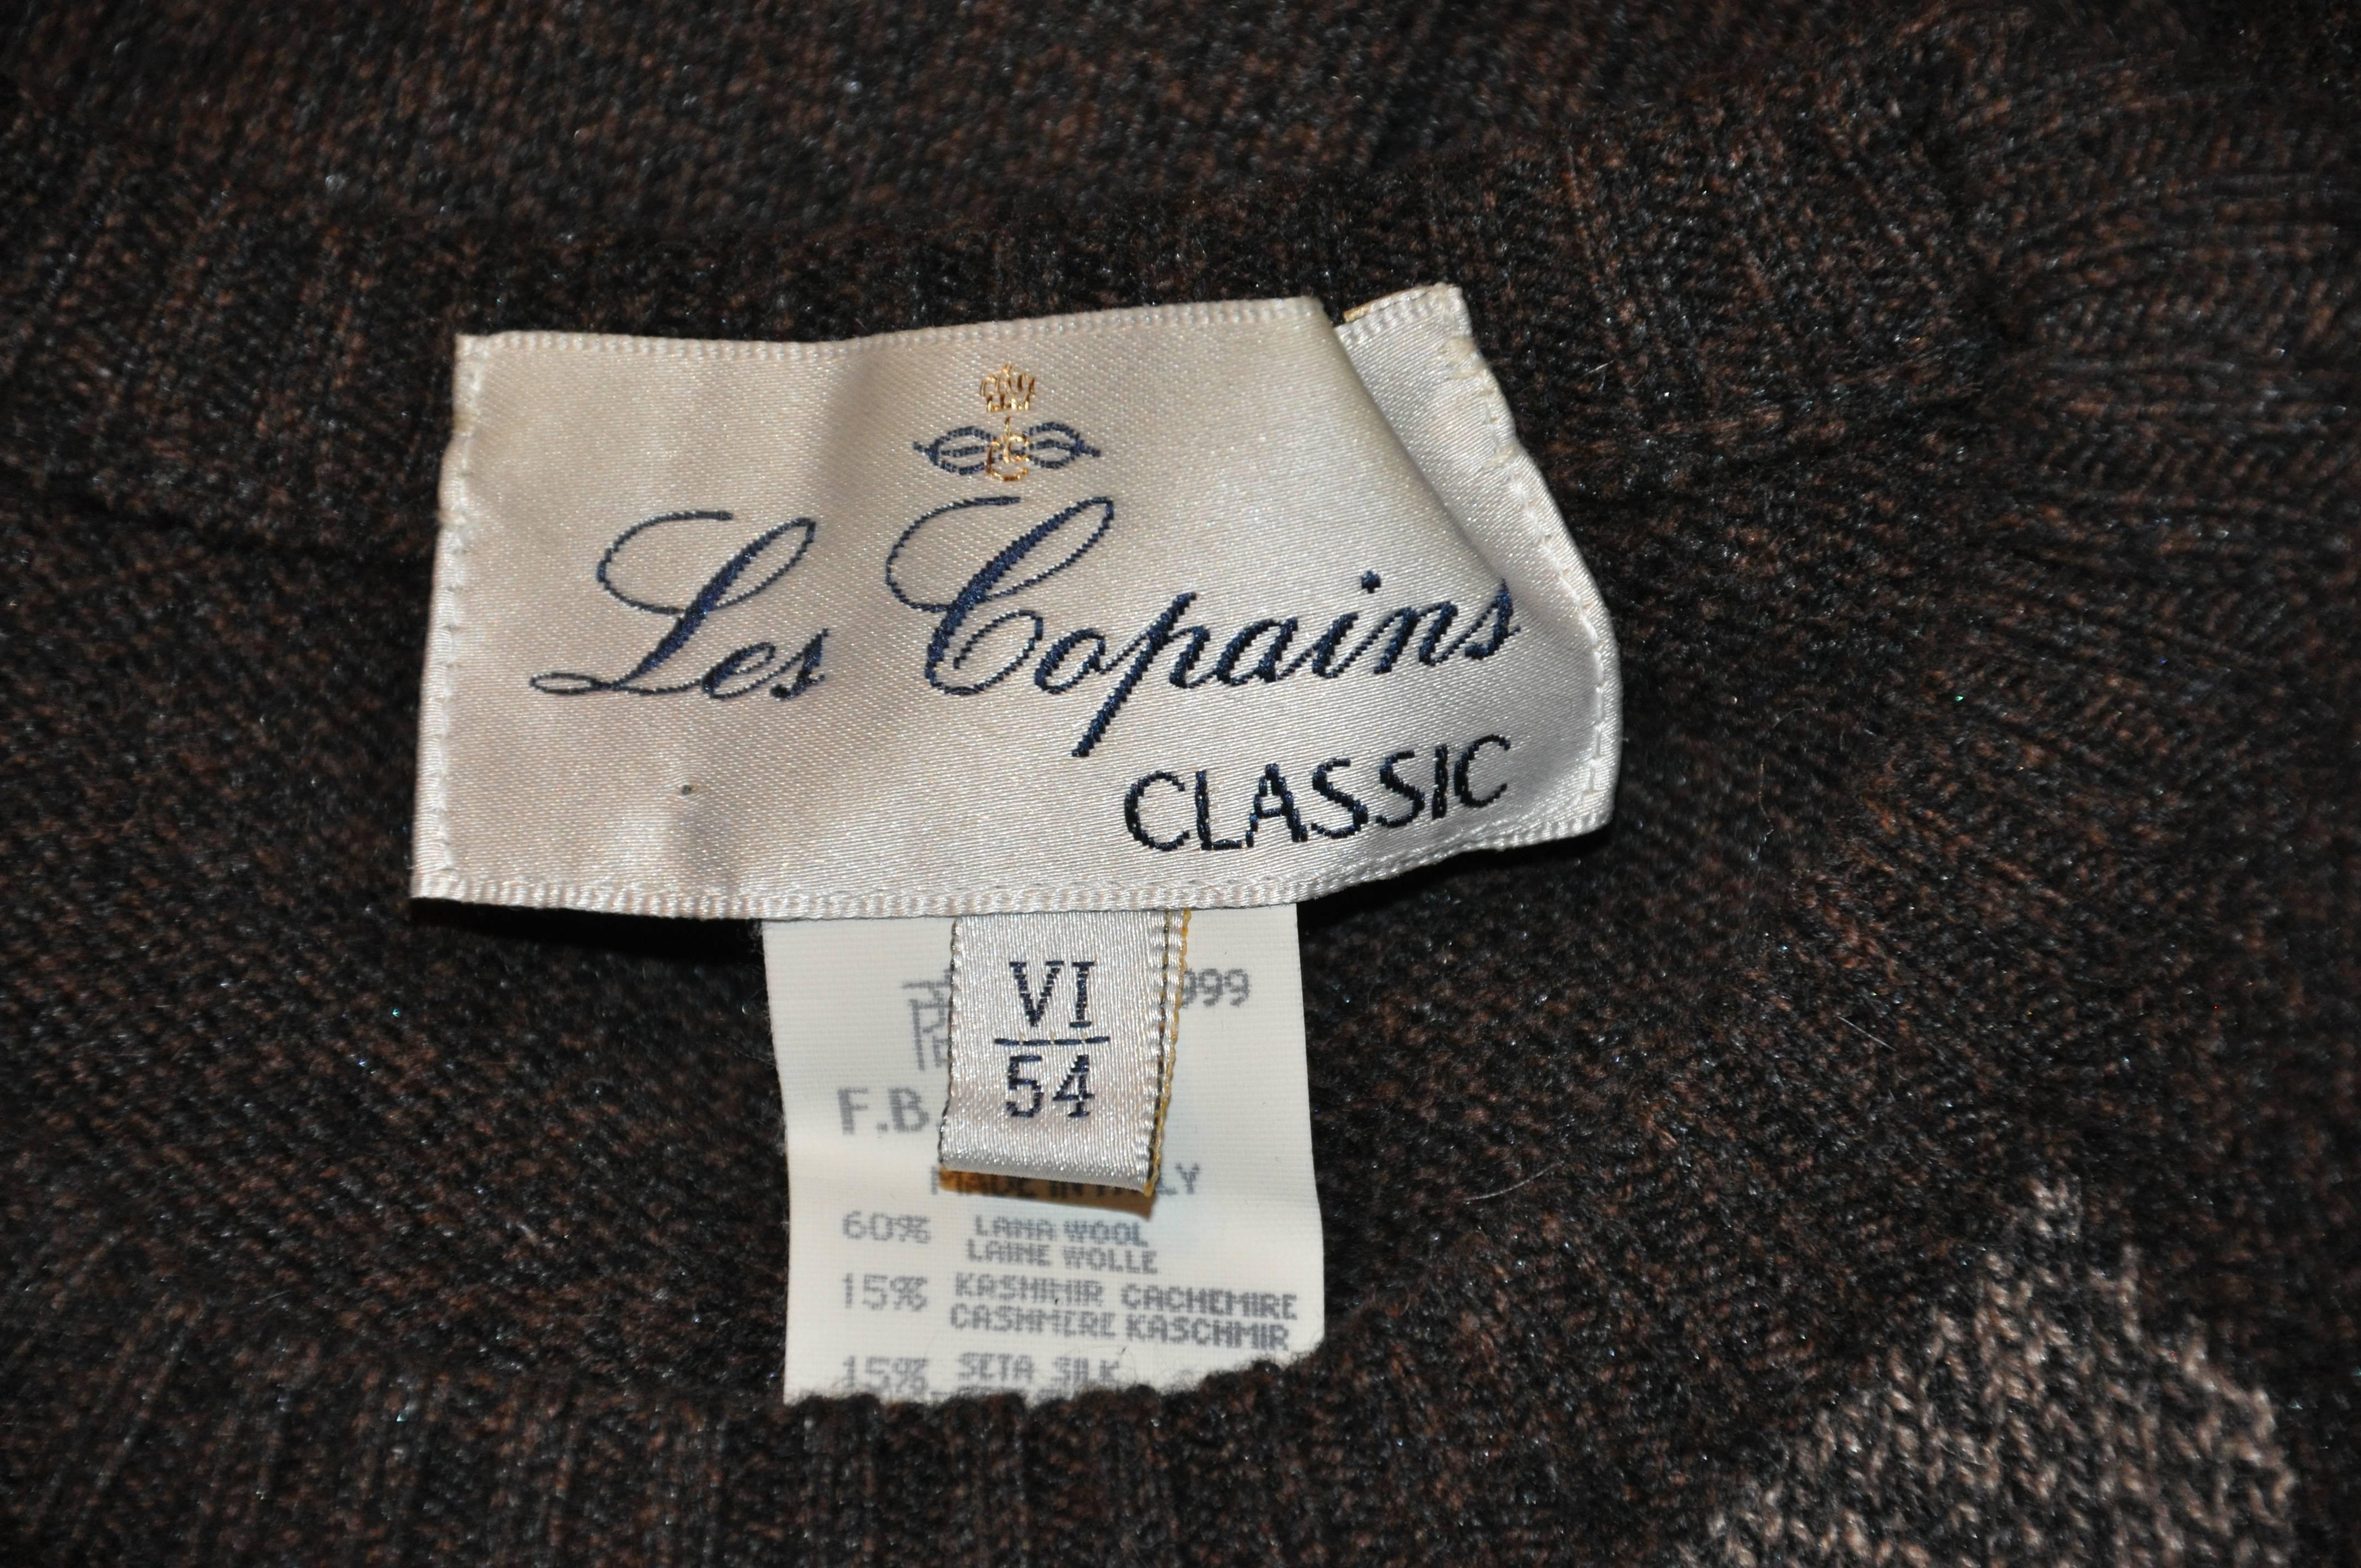        Les Copains men's multi-color pullover top in shades of browns mixed with patches of grays & black as well as browns & black is made with a wonderful blend of Cashmere 15%, wool 60%, silk 15%, and angora 10%. The total length measures 29